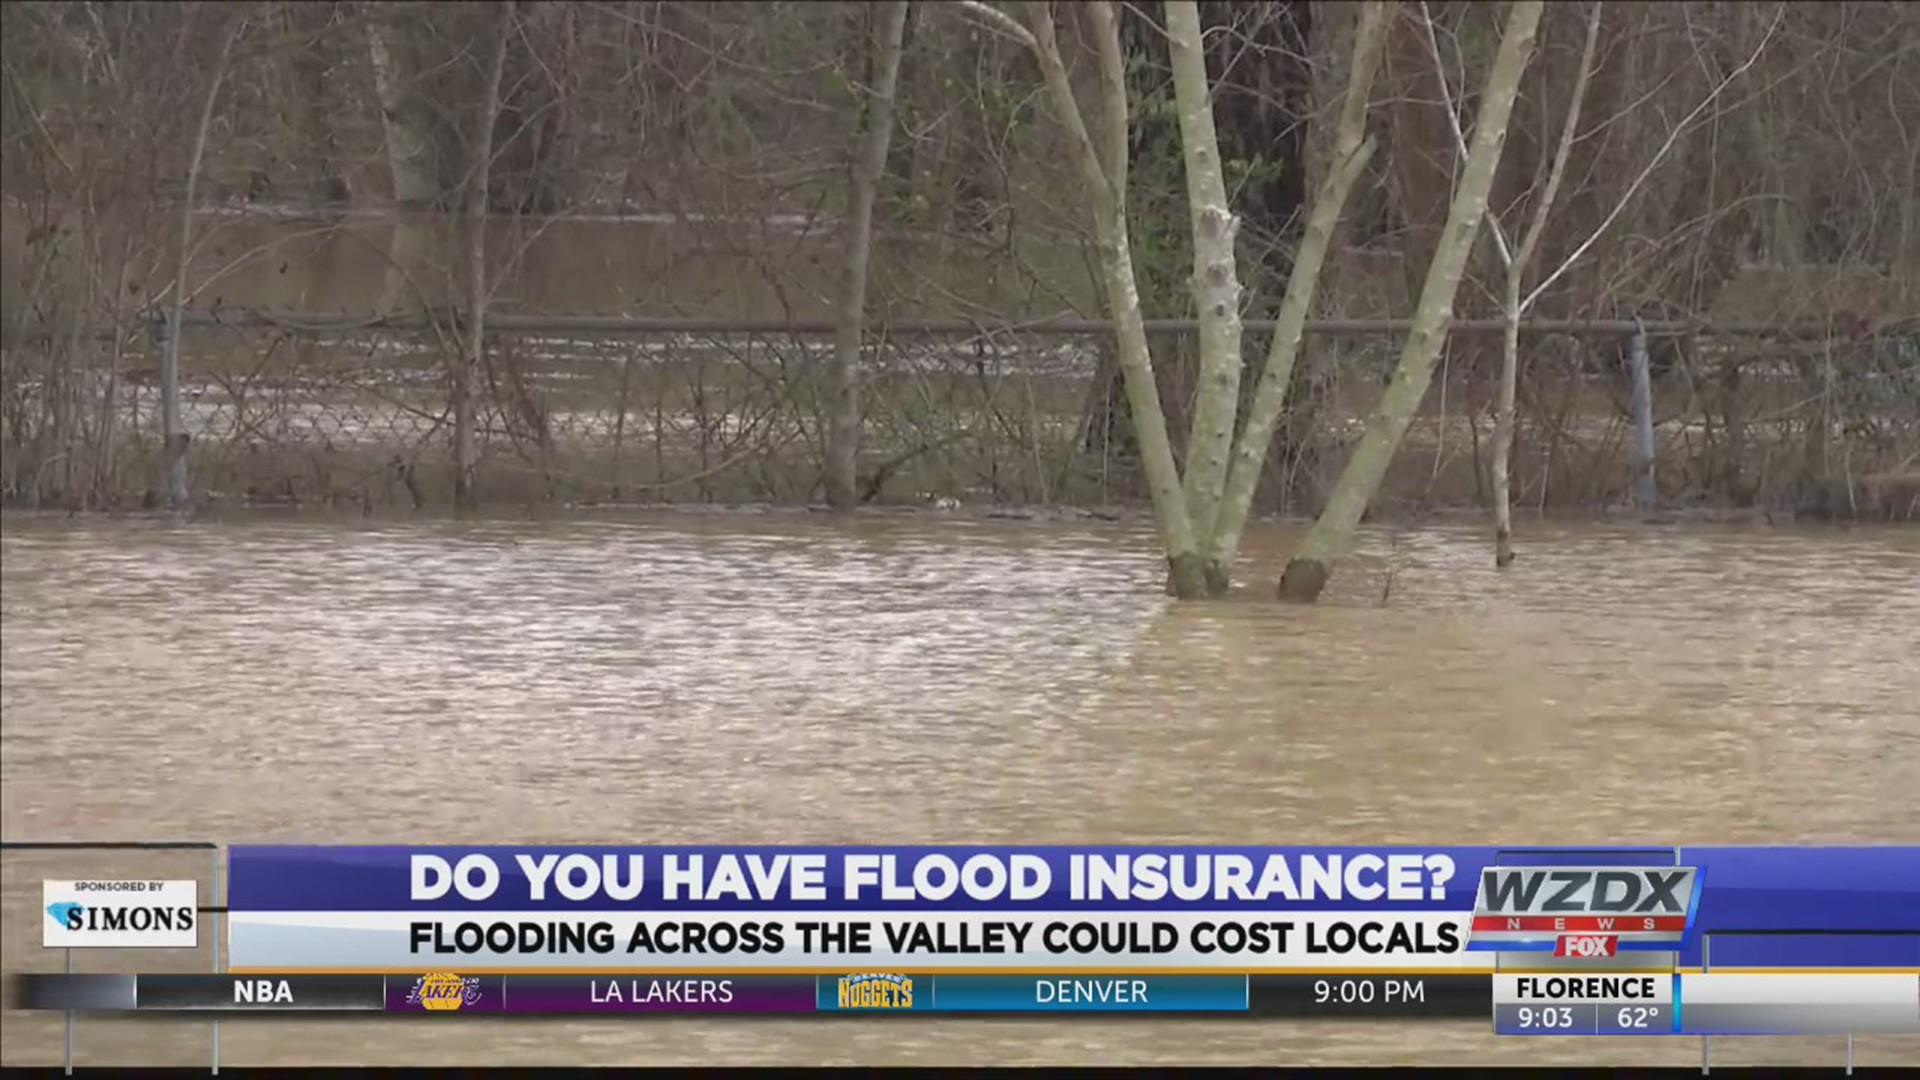 Less than 20% of homeowners have flood insurance. With all the rain we’re experiencing in North Alabama, you may need it. You probably have home insurance and think “I’m good”. But, you might want to take a second look. Chances are– you’re not covered.